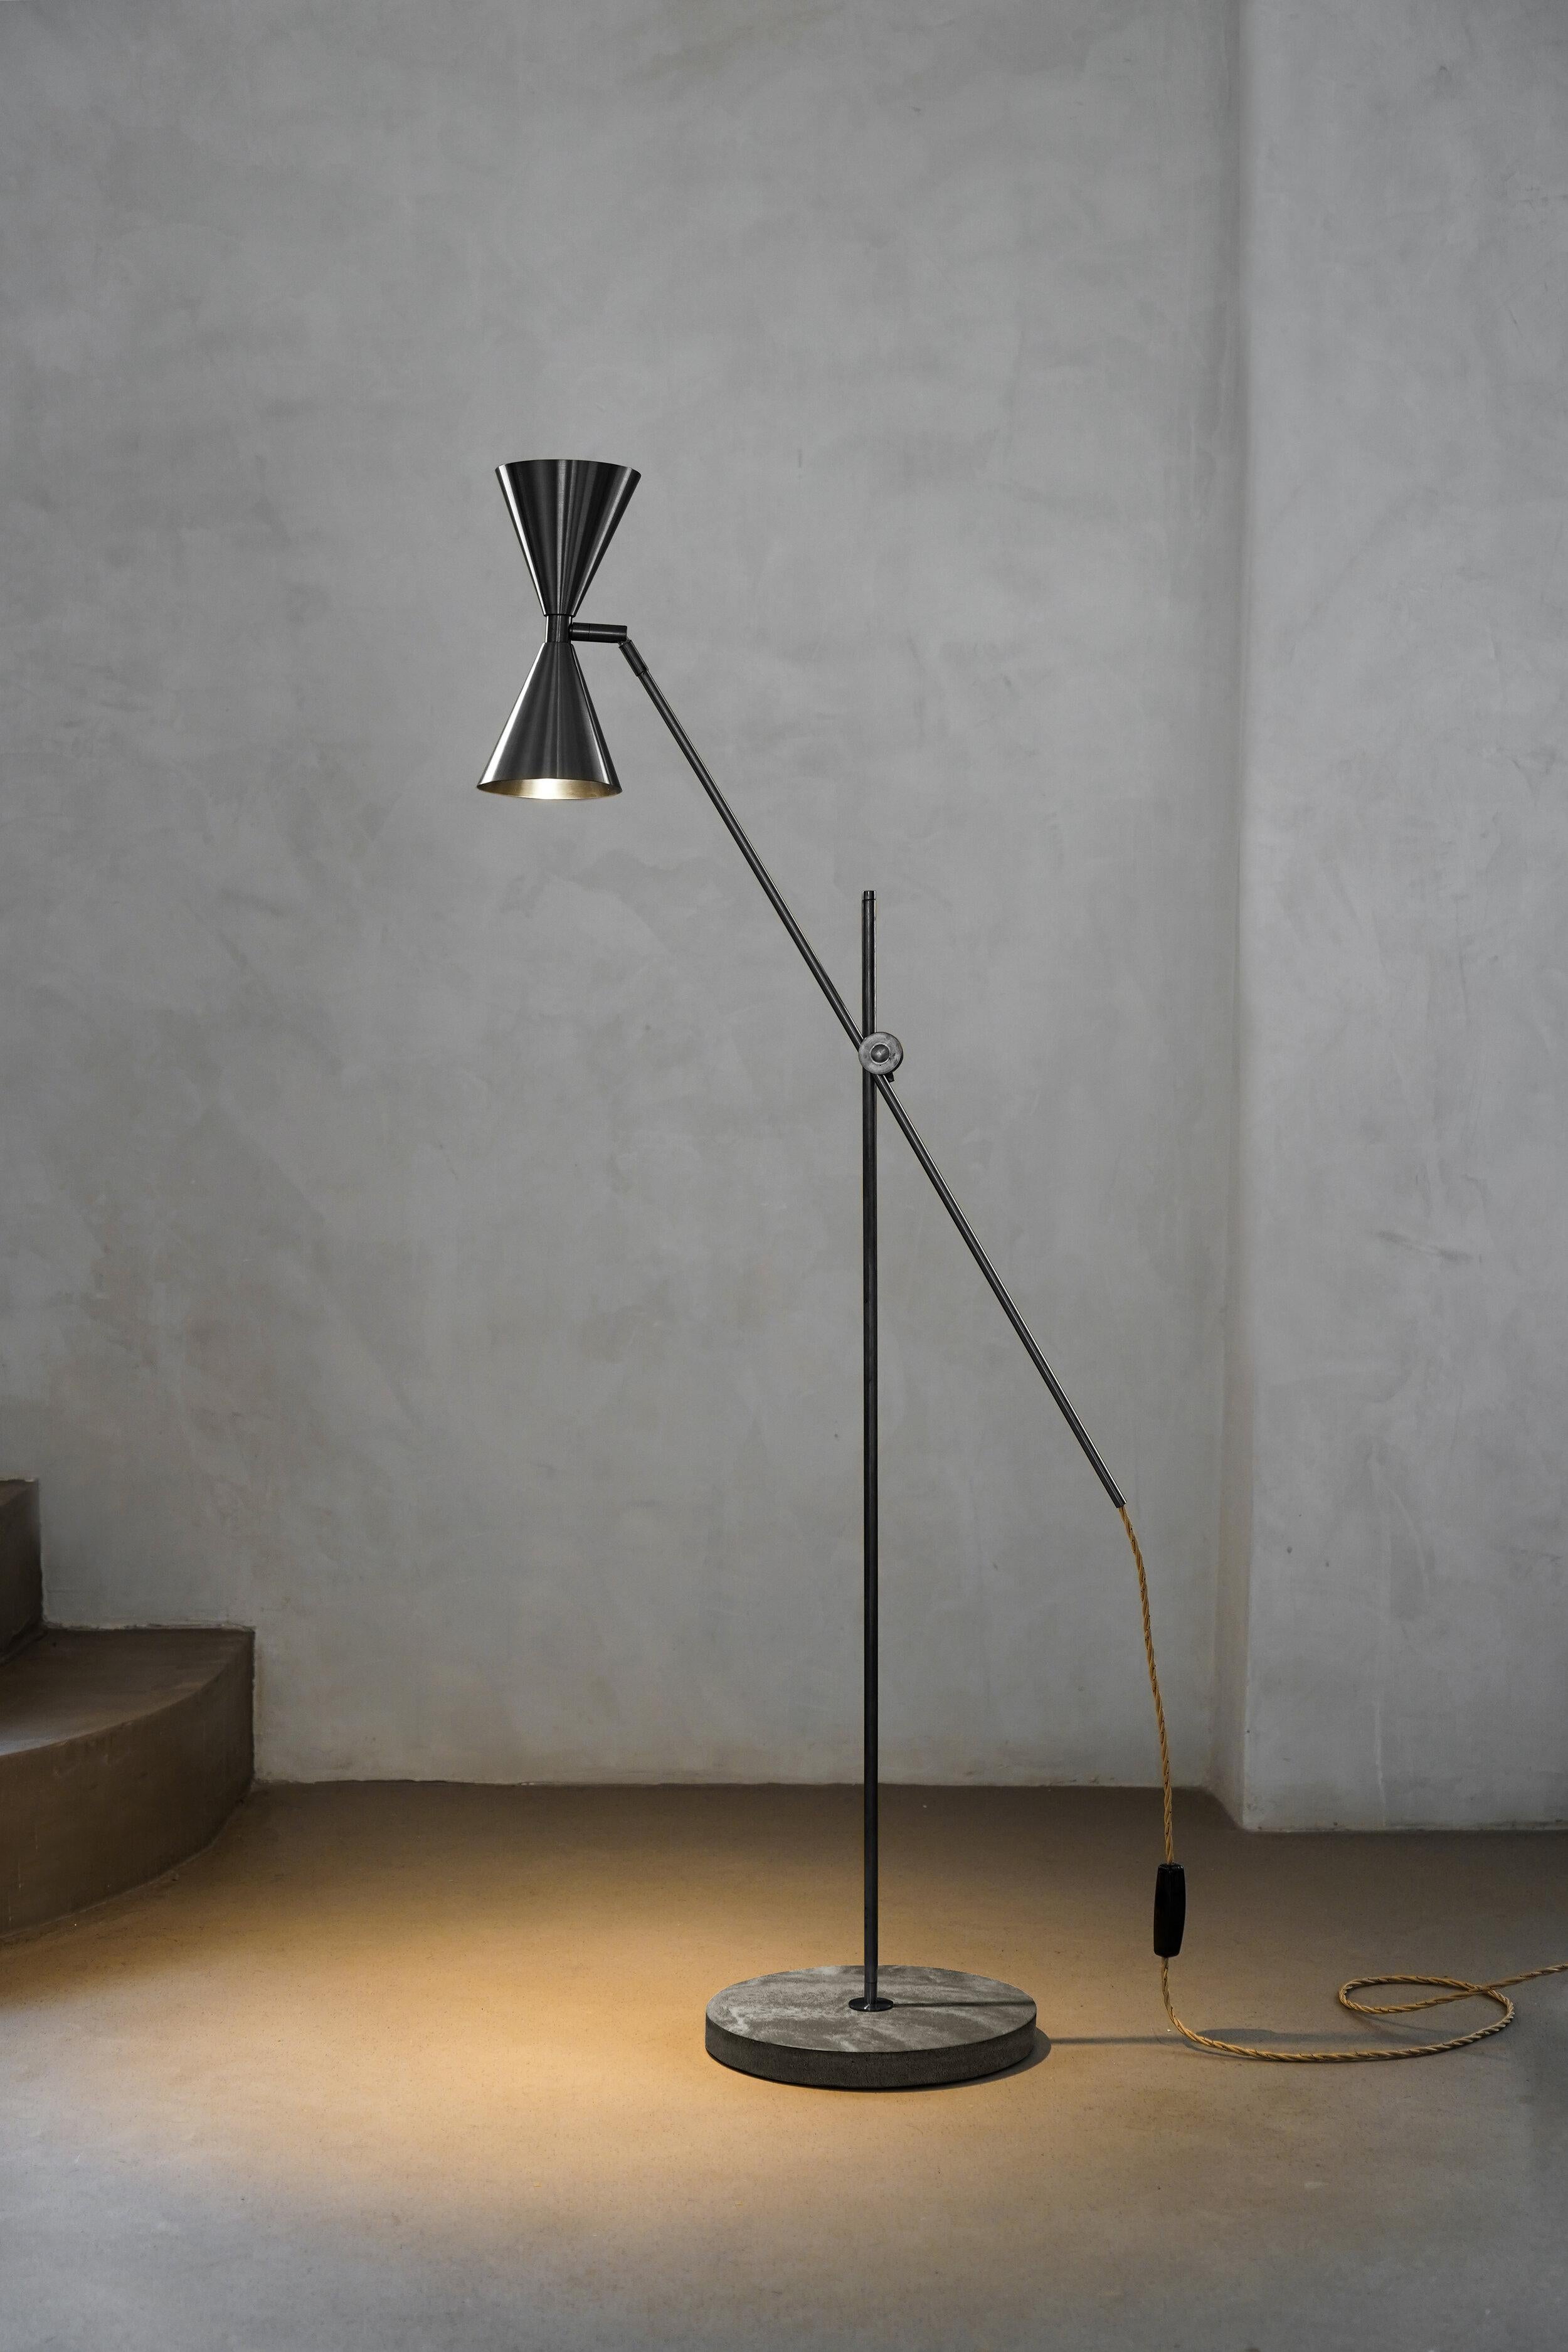 Spanish Cone Double Floor Lamp by Contain